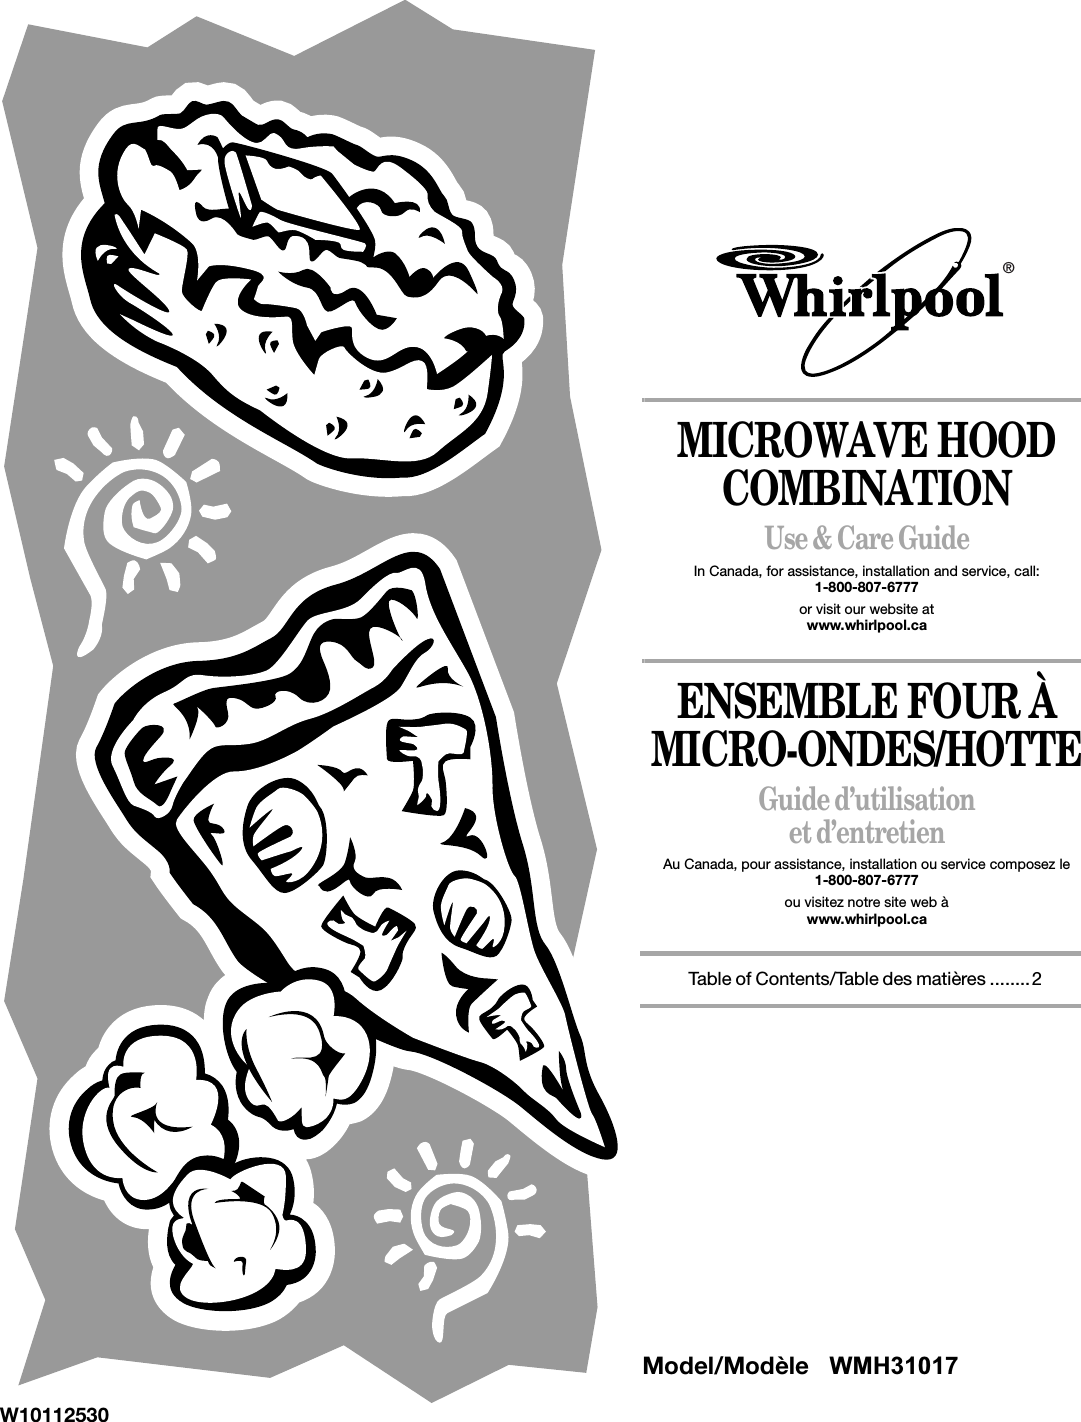 MICROWAVE HOOD COMBINATIONUse &amp; Care GuideIn Canada, for assistance, installation and service, call: 1-800-807-6777or visit our website at www.whirlpool.caENSEMBLE FOUR À MICRO-ONDES/HOTTEGuide d’utilisation et d’entretienAu Canada, pour assistance, installation ou service composez le 1-800-807-6777ou visitez notre site web àwww.whirlpool.caTable of Contents/Table des matières ........2W10112530®Model/ModèleWMH31017